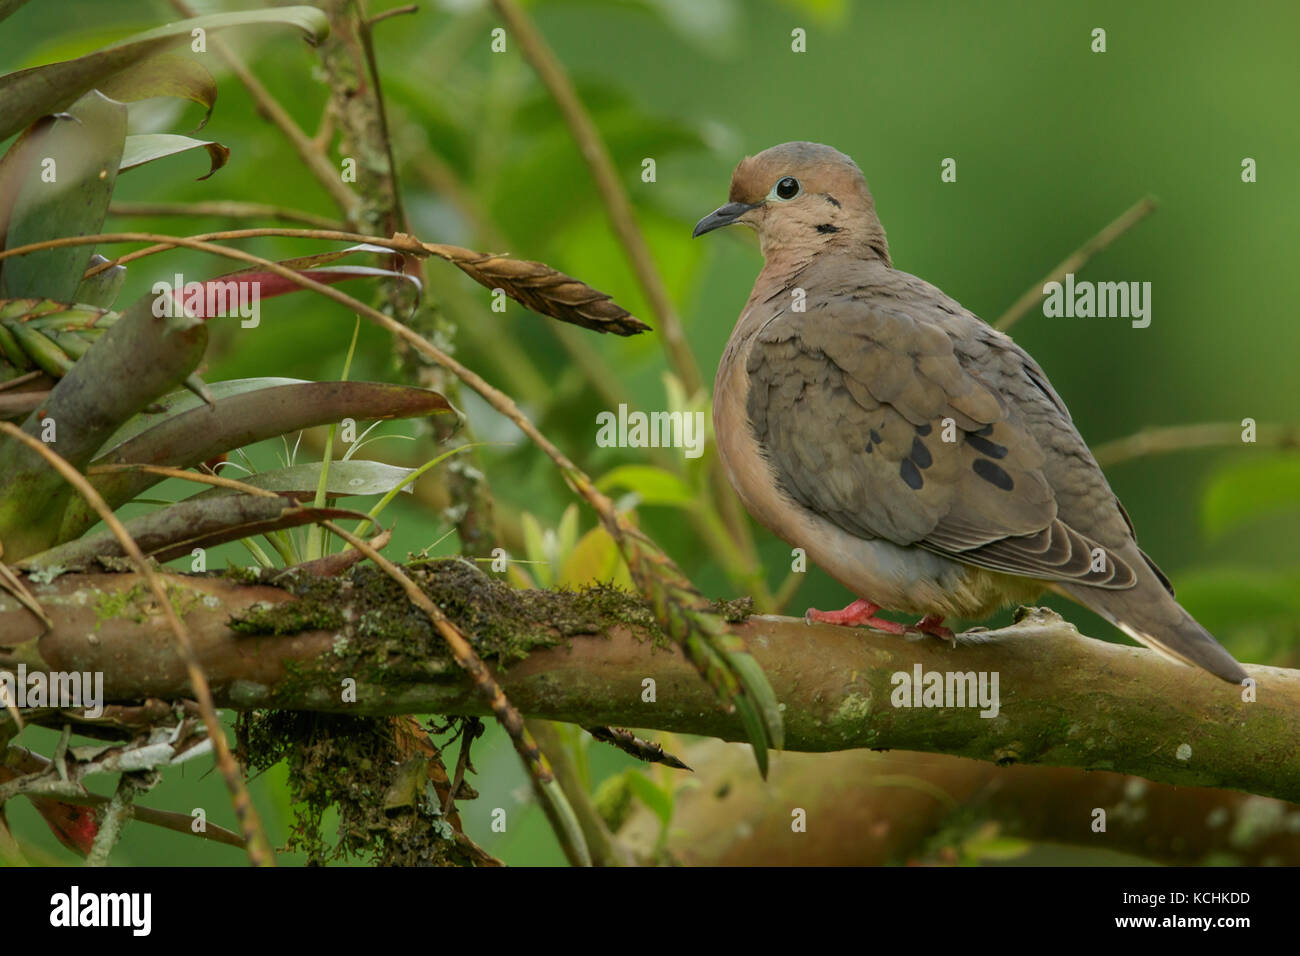 Eared Dove (Zenaida auriculata) perched on a branch in the mountains of Colombia, South America. Stock Photo